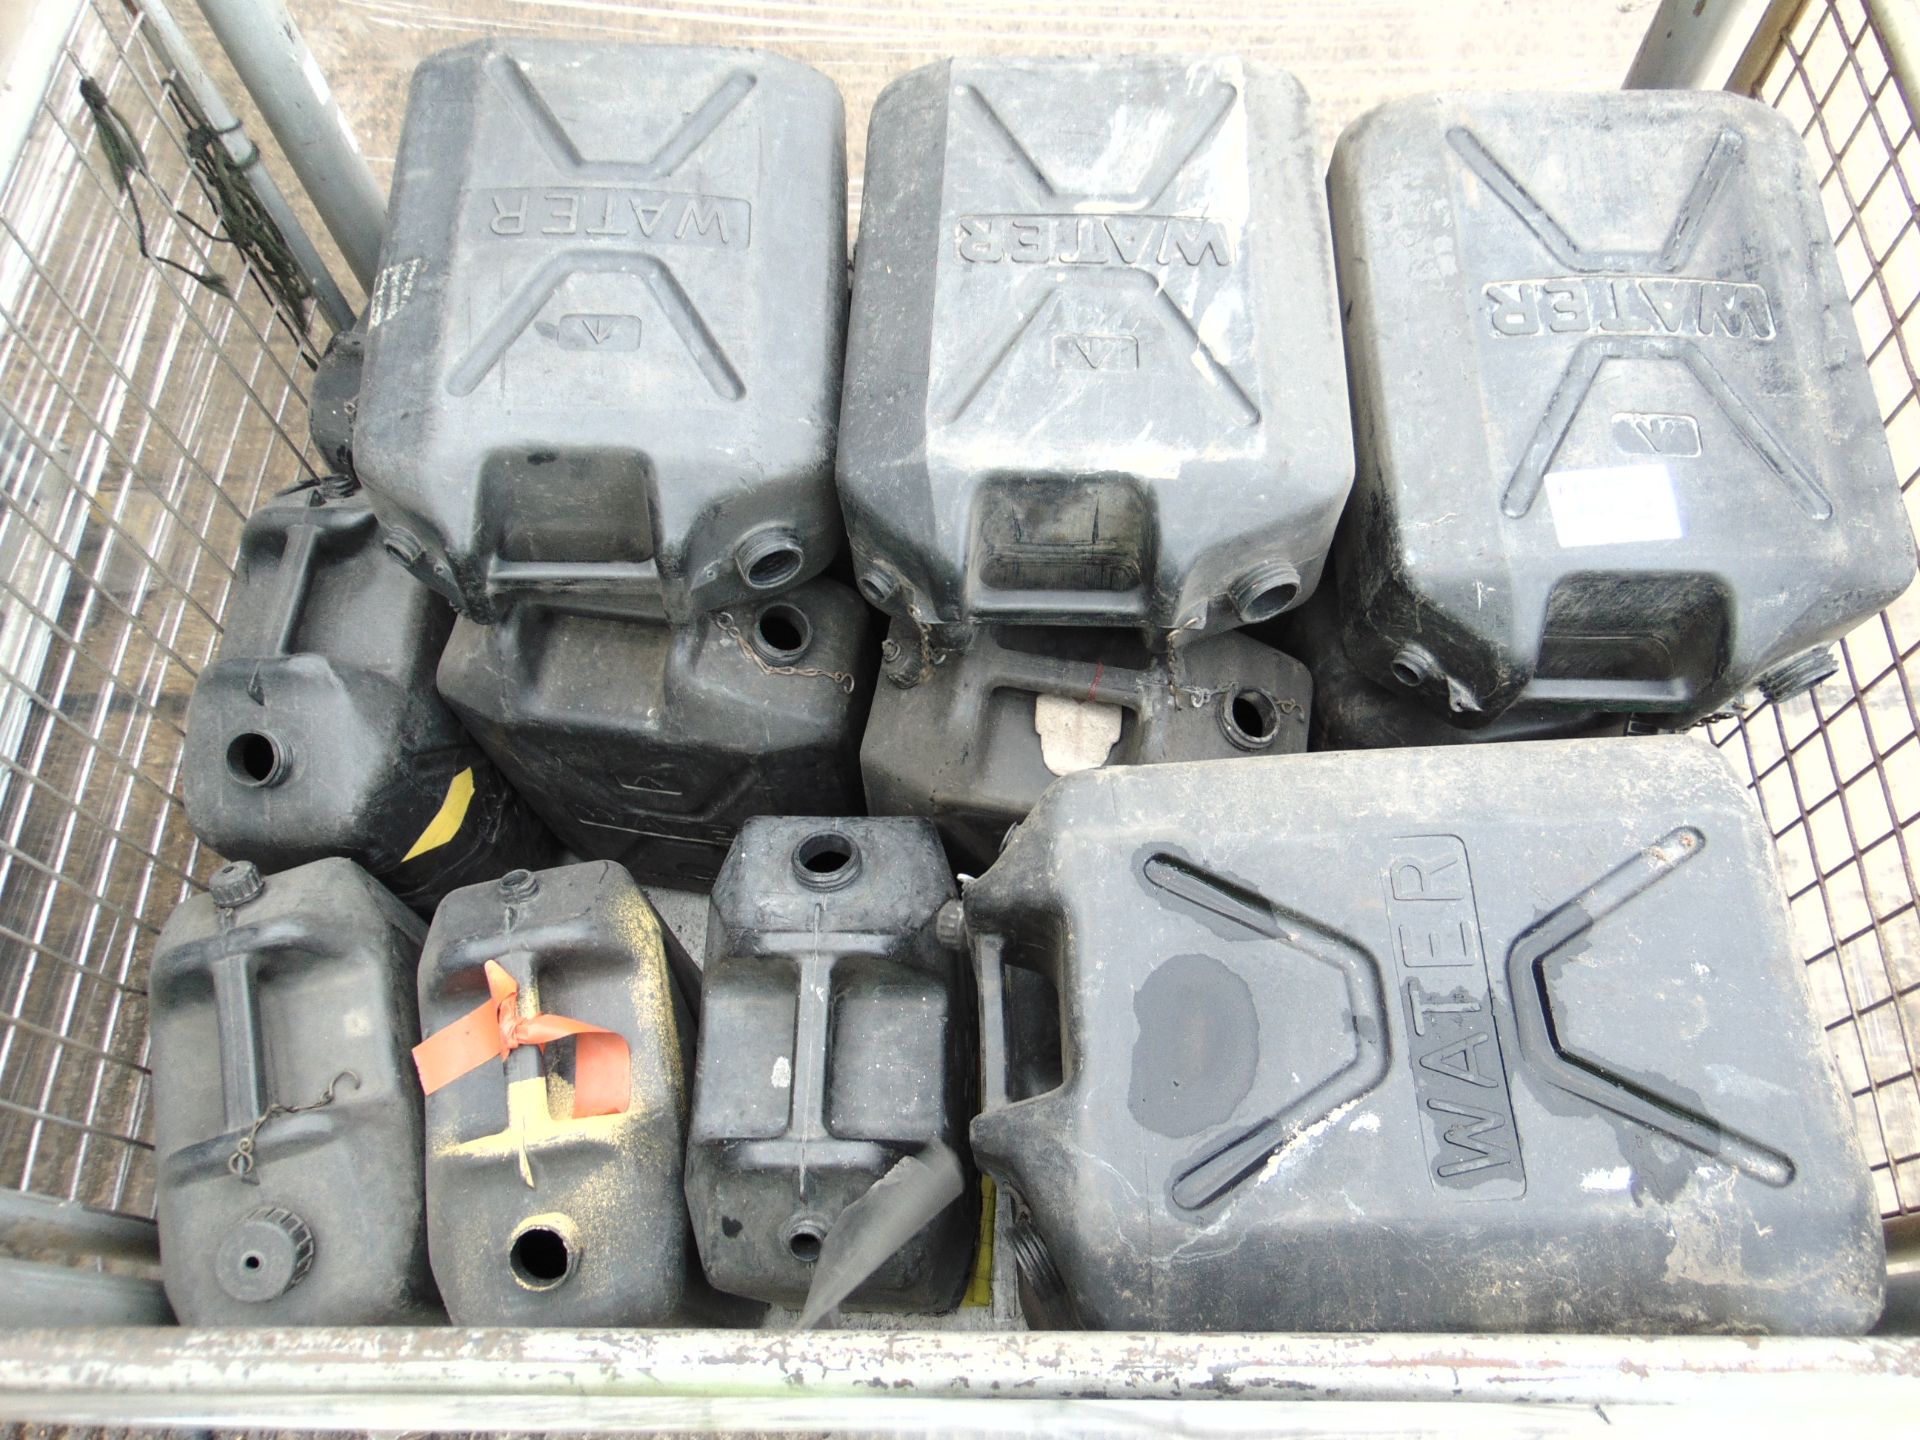 20 x 20 Litre Plastic Water Jerry Cans MoD Stock - Image 3 of 5